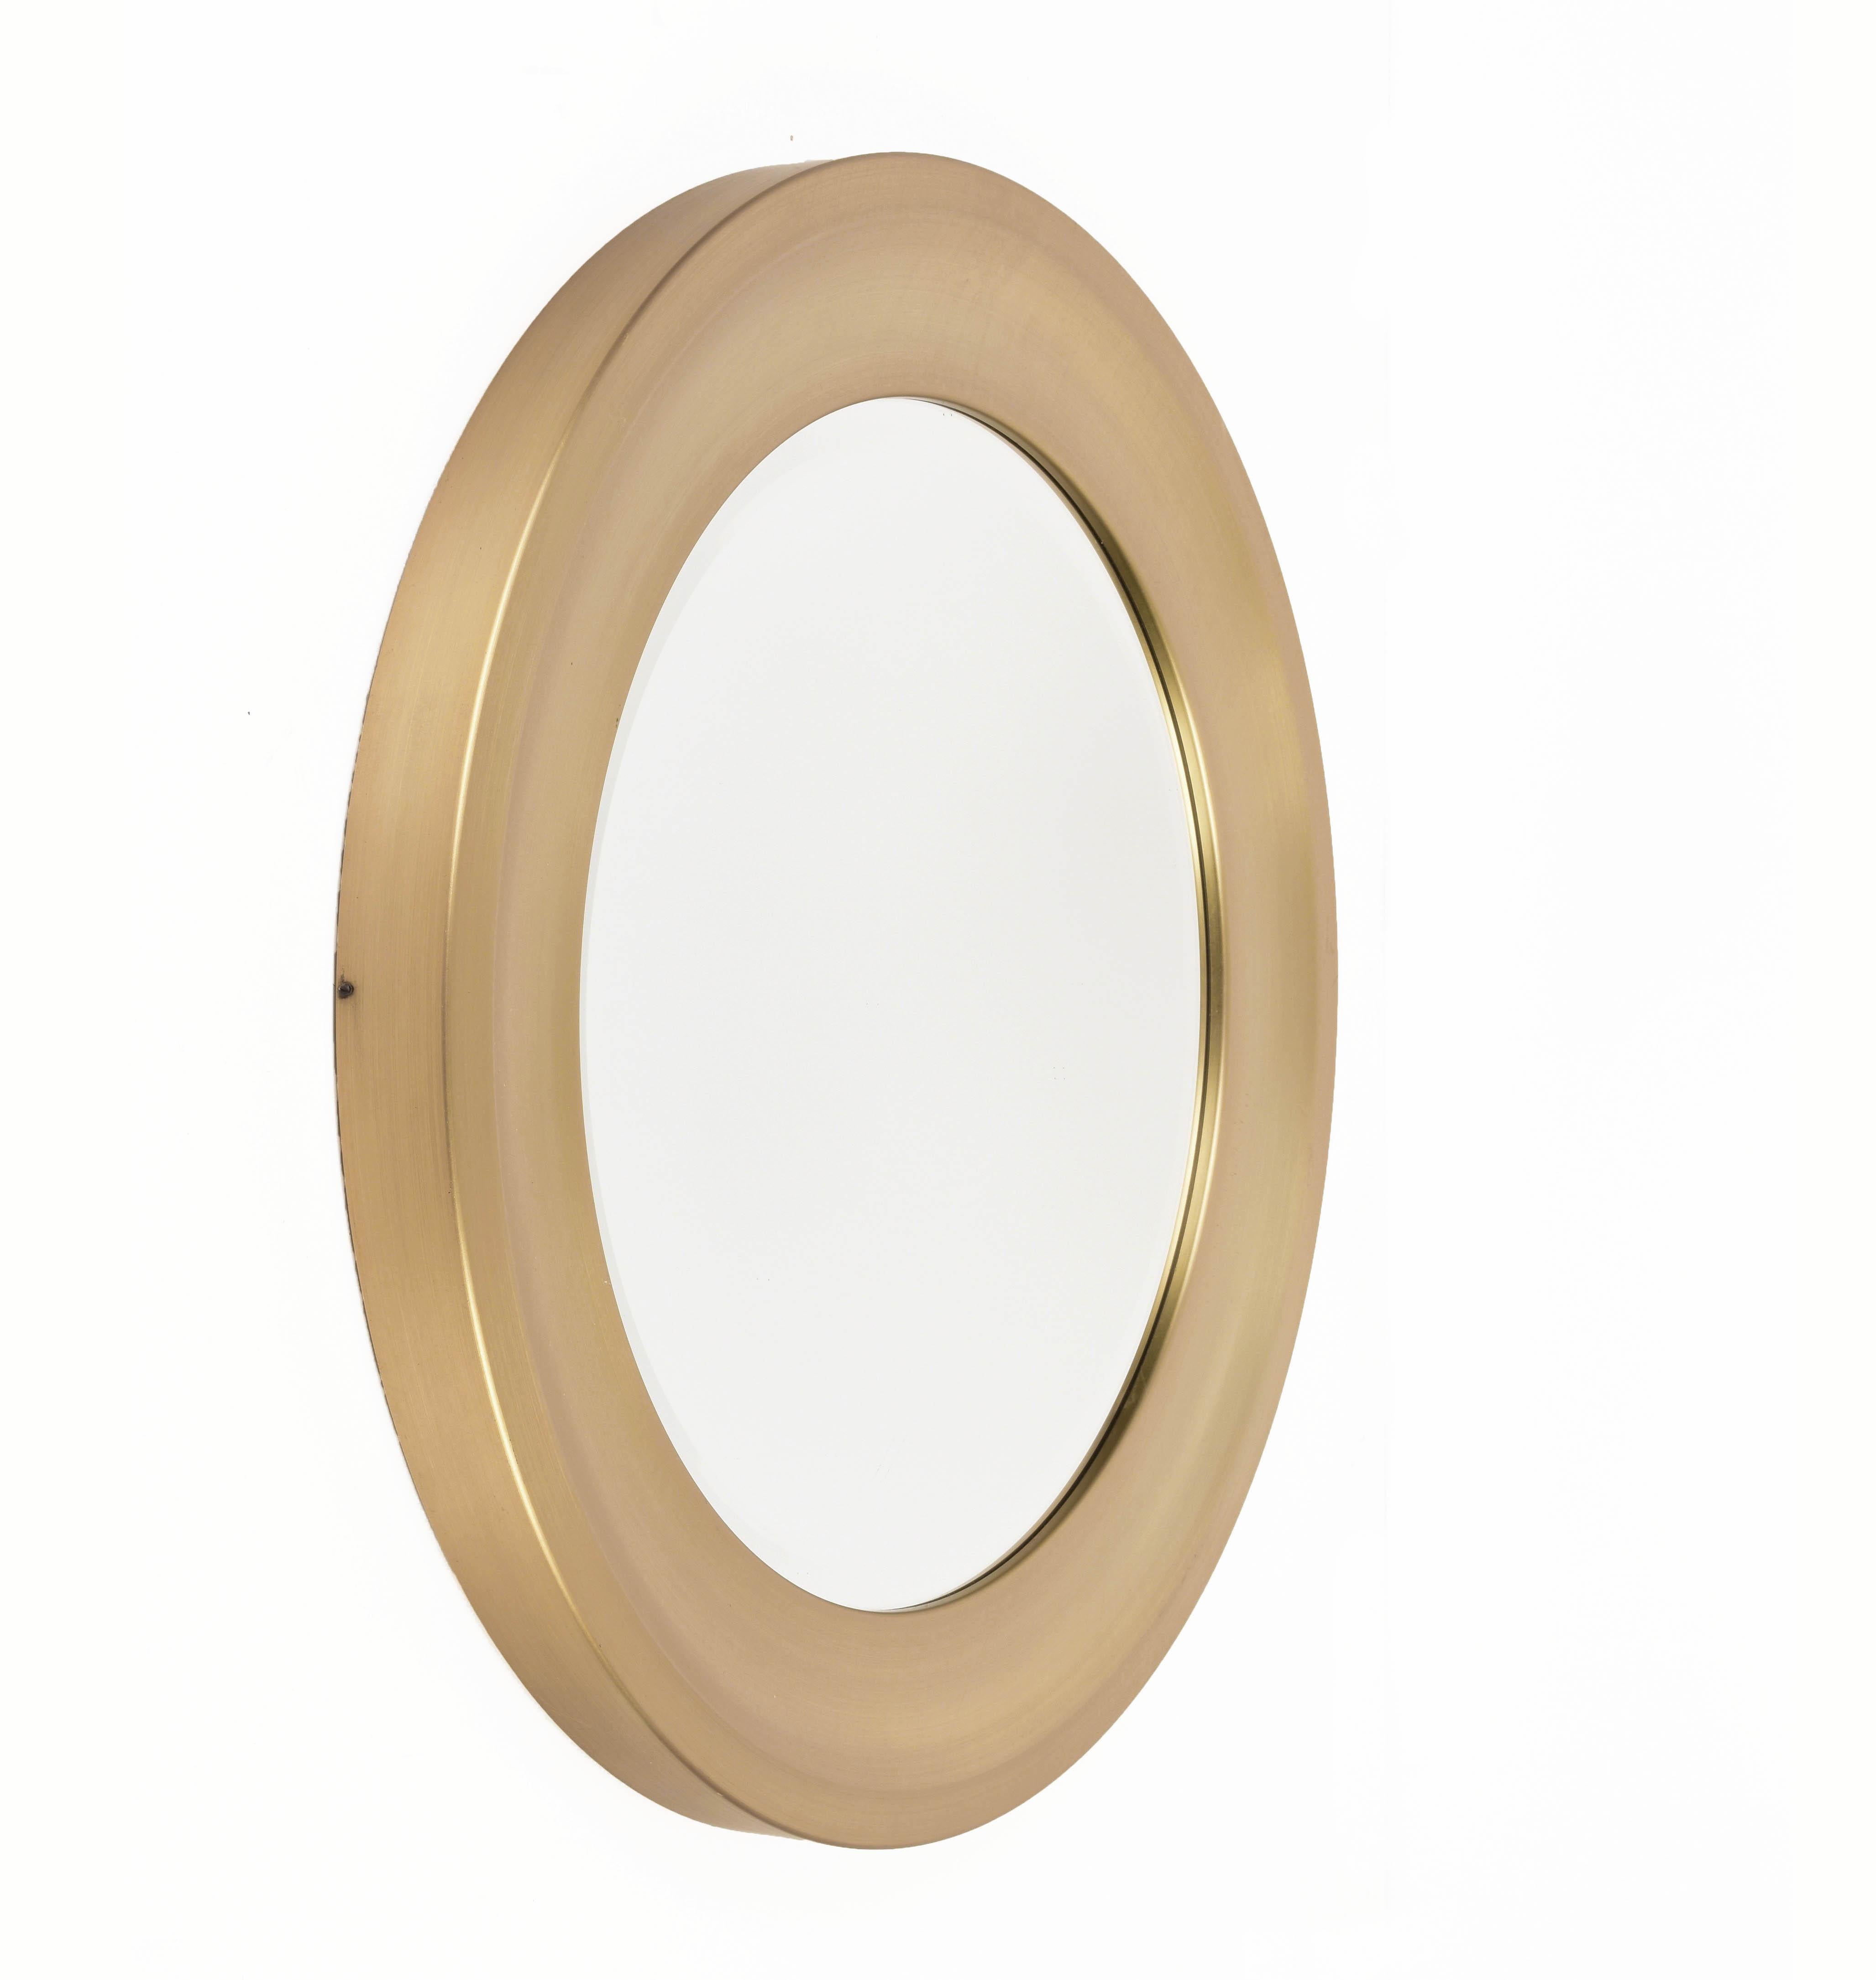 Amazing midcentury gilded aluminum frame round bevel mirror. This item is attributed to Sergio Mazza for Artemide in Italy during 1960s.

The original mirror in the center is in excellent condition and the frame has a concave center which creates